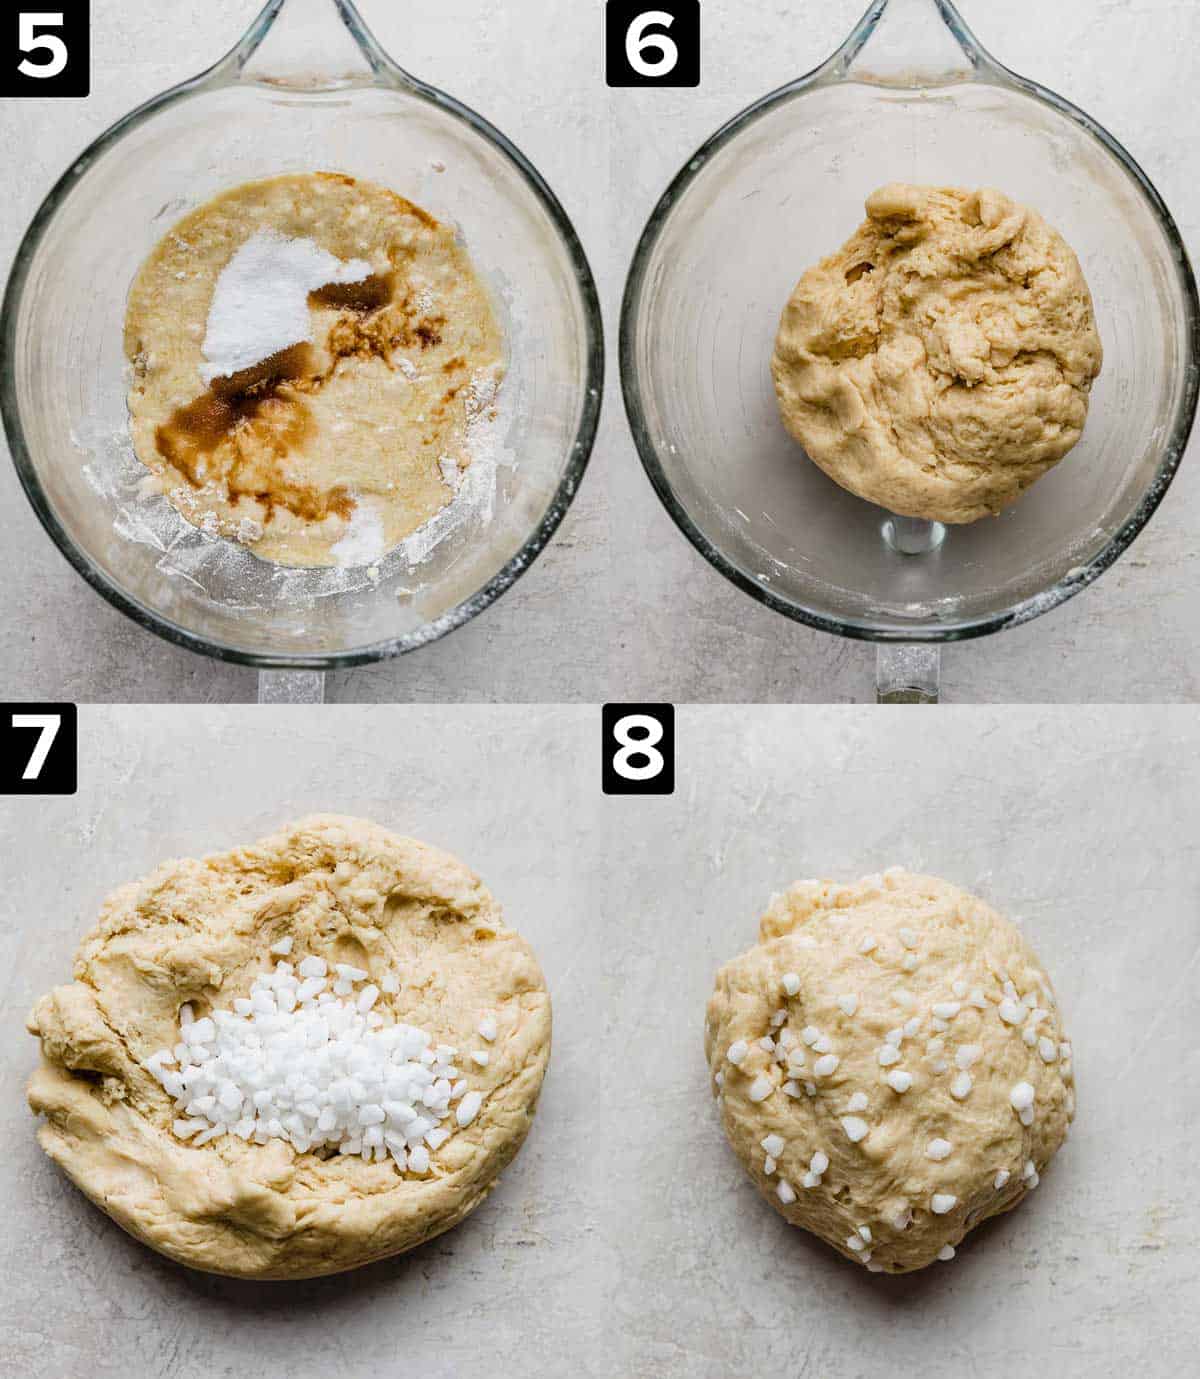 Four images showing the making of liege waffle dough in a glass bowl, then bottom two images are of pearl sugar mixed into the dough.